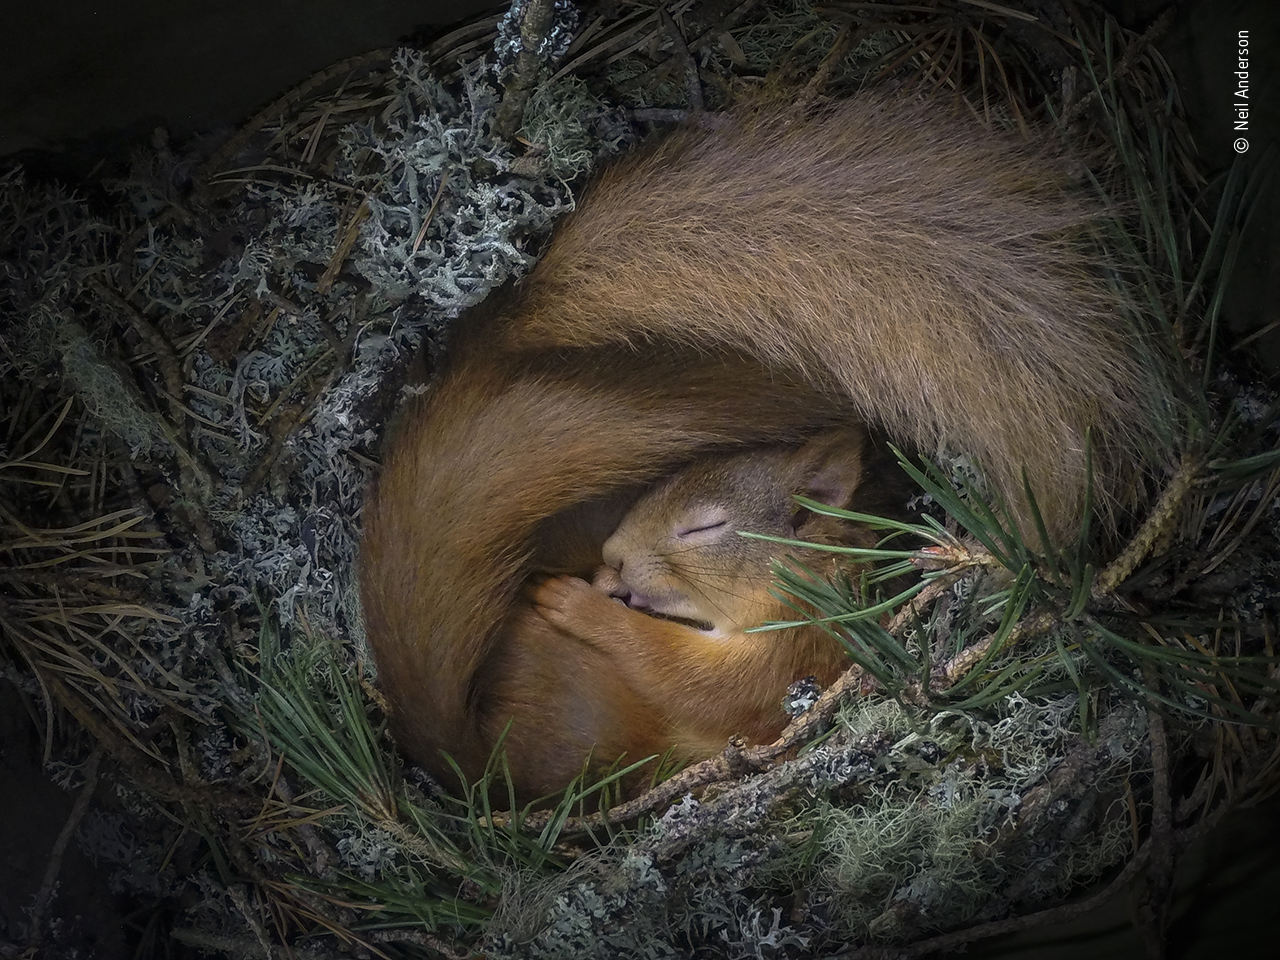 Two Eurasian red squirrels (only one is visible) find comfort curled up in pine trees in the Scottish Highlands